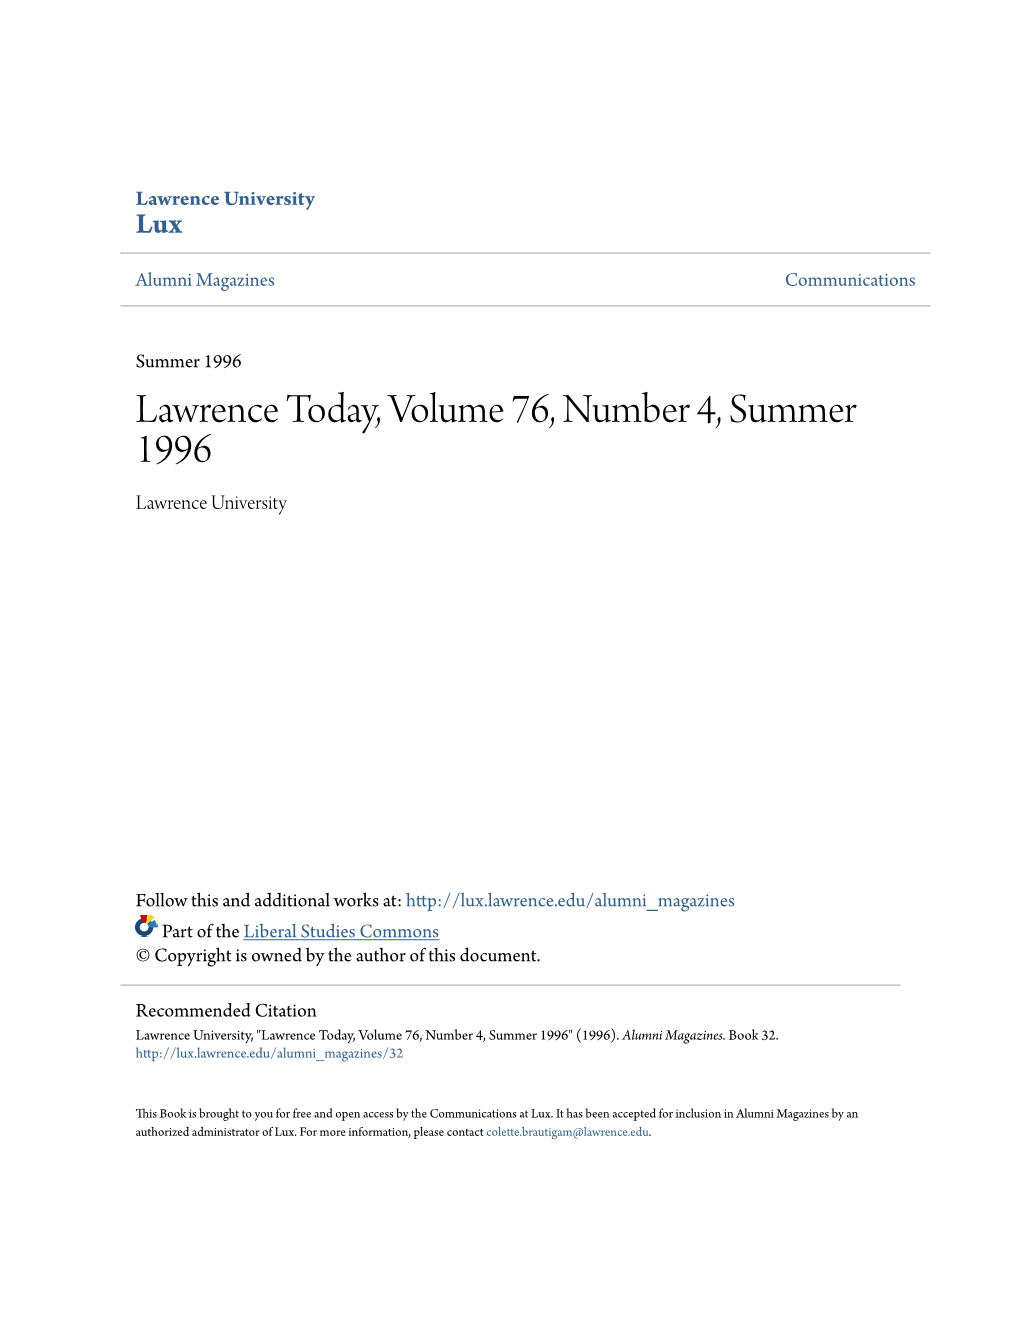 Lawrence Today, Volume 76, Number 4, Summer 1996 Lawrence University